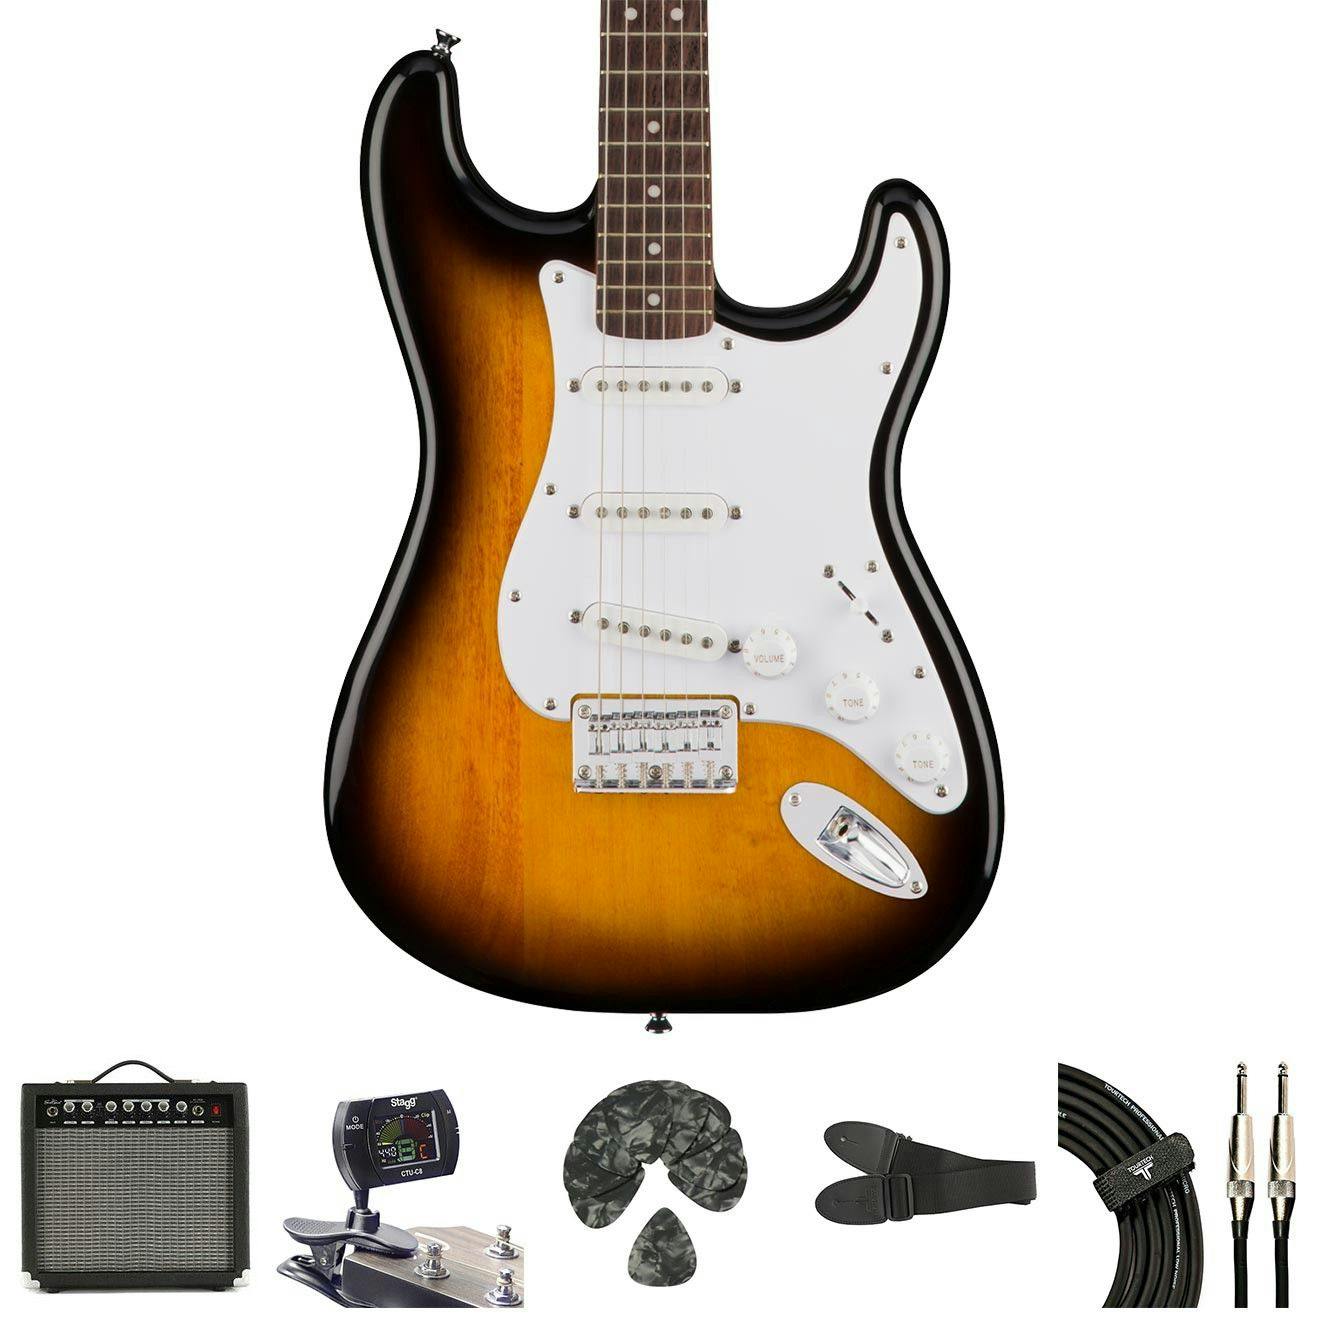 Squier Bullet Stratocaster HT in Sunburst Starter Pack with Amp & Accessories